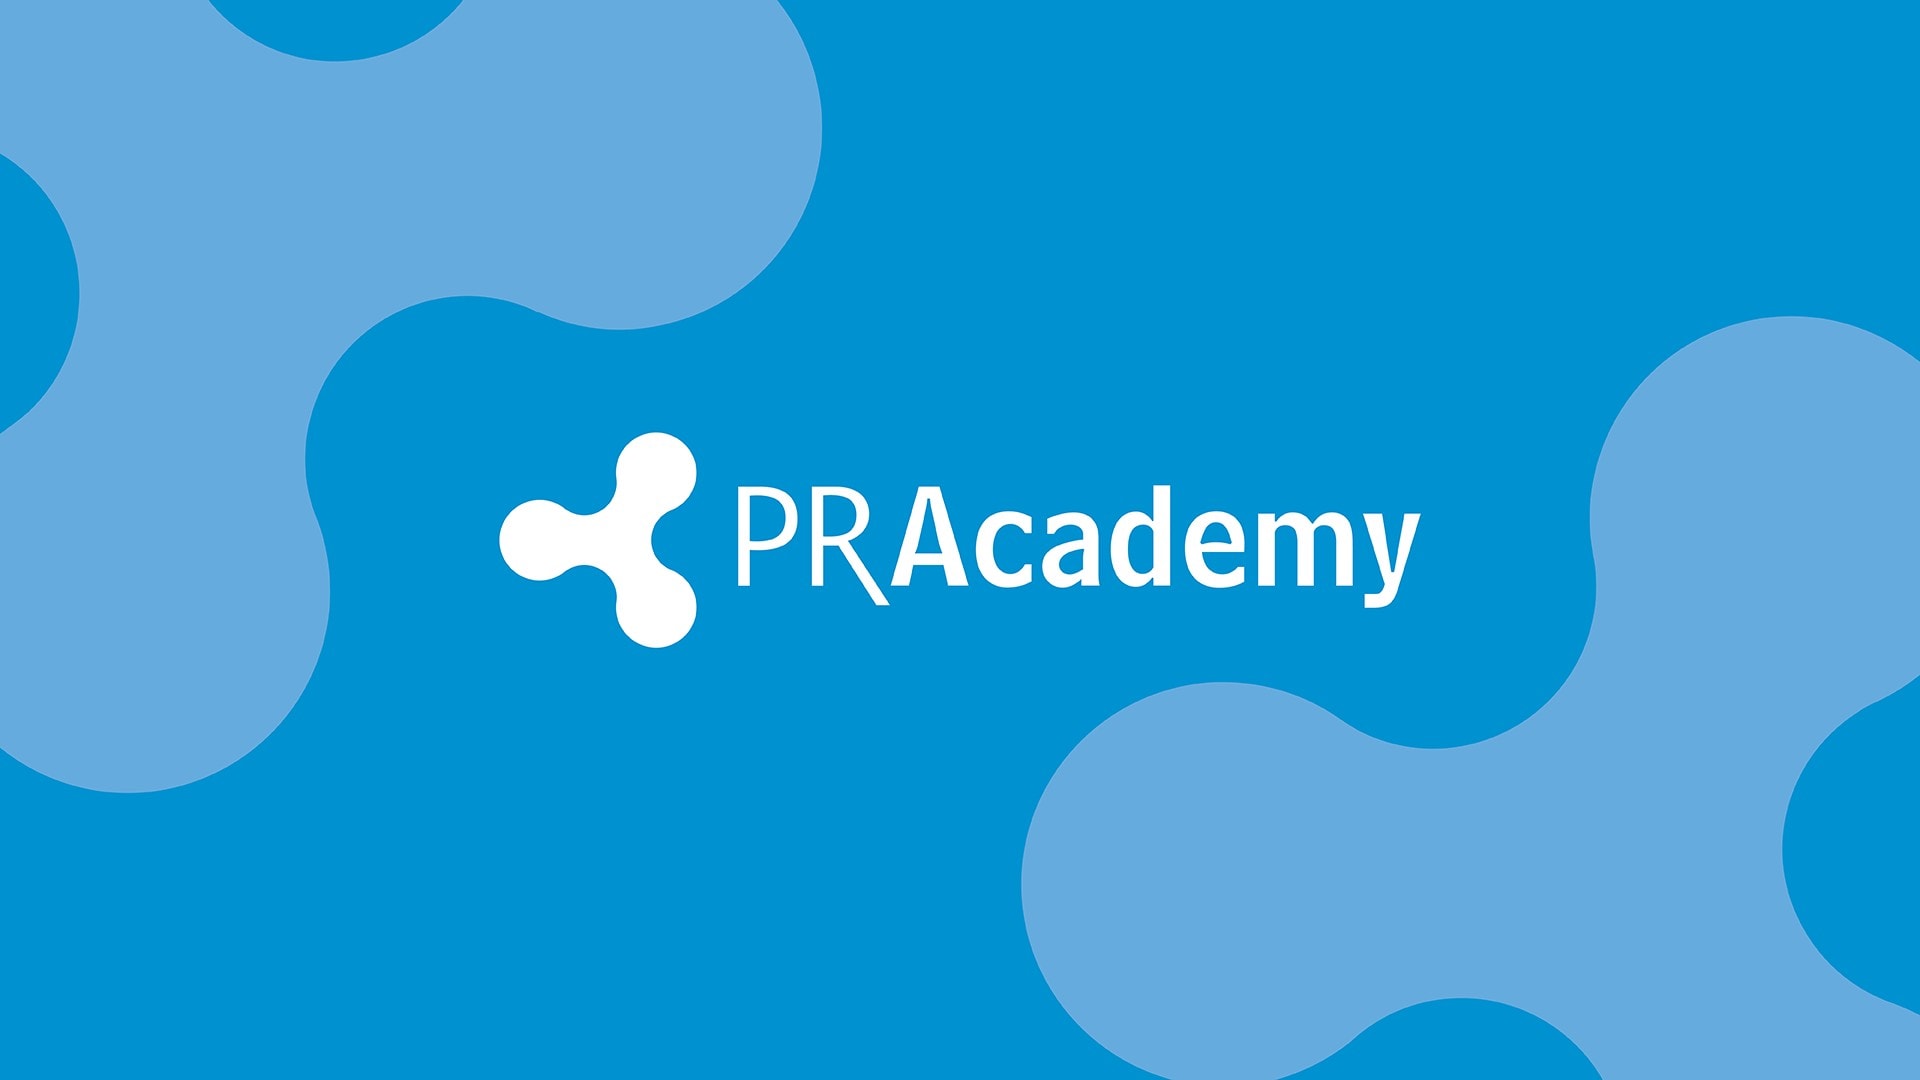 The PR Academy Logo in white on a Blue Background